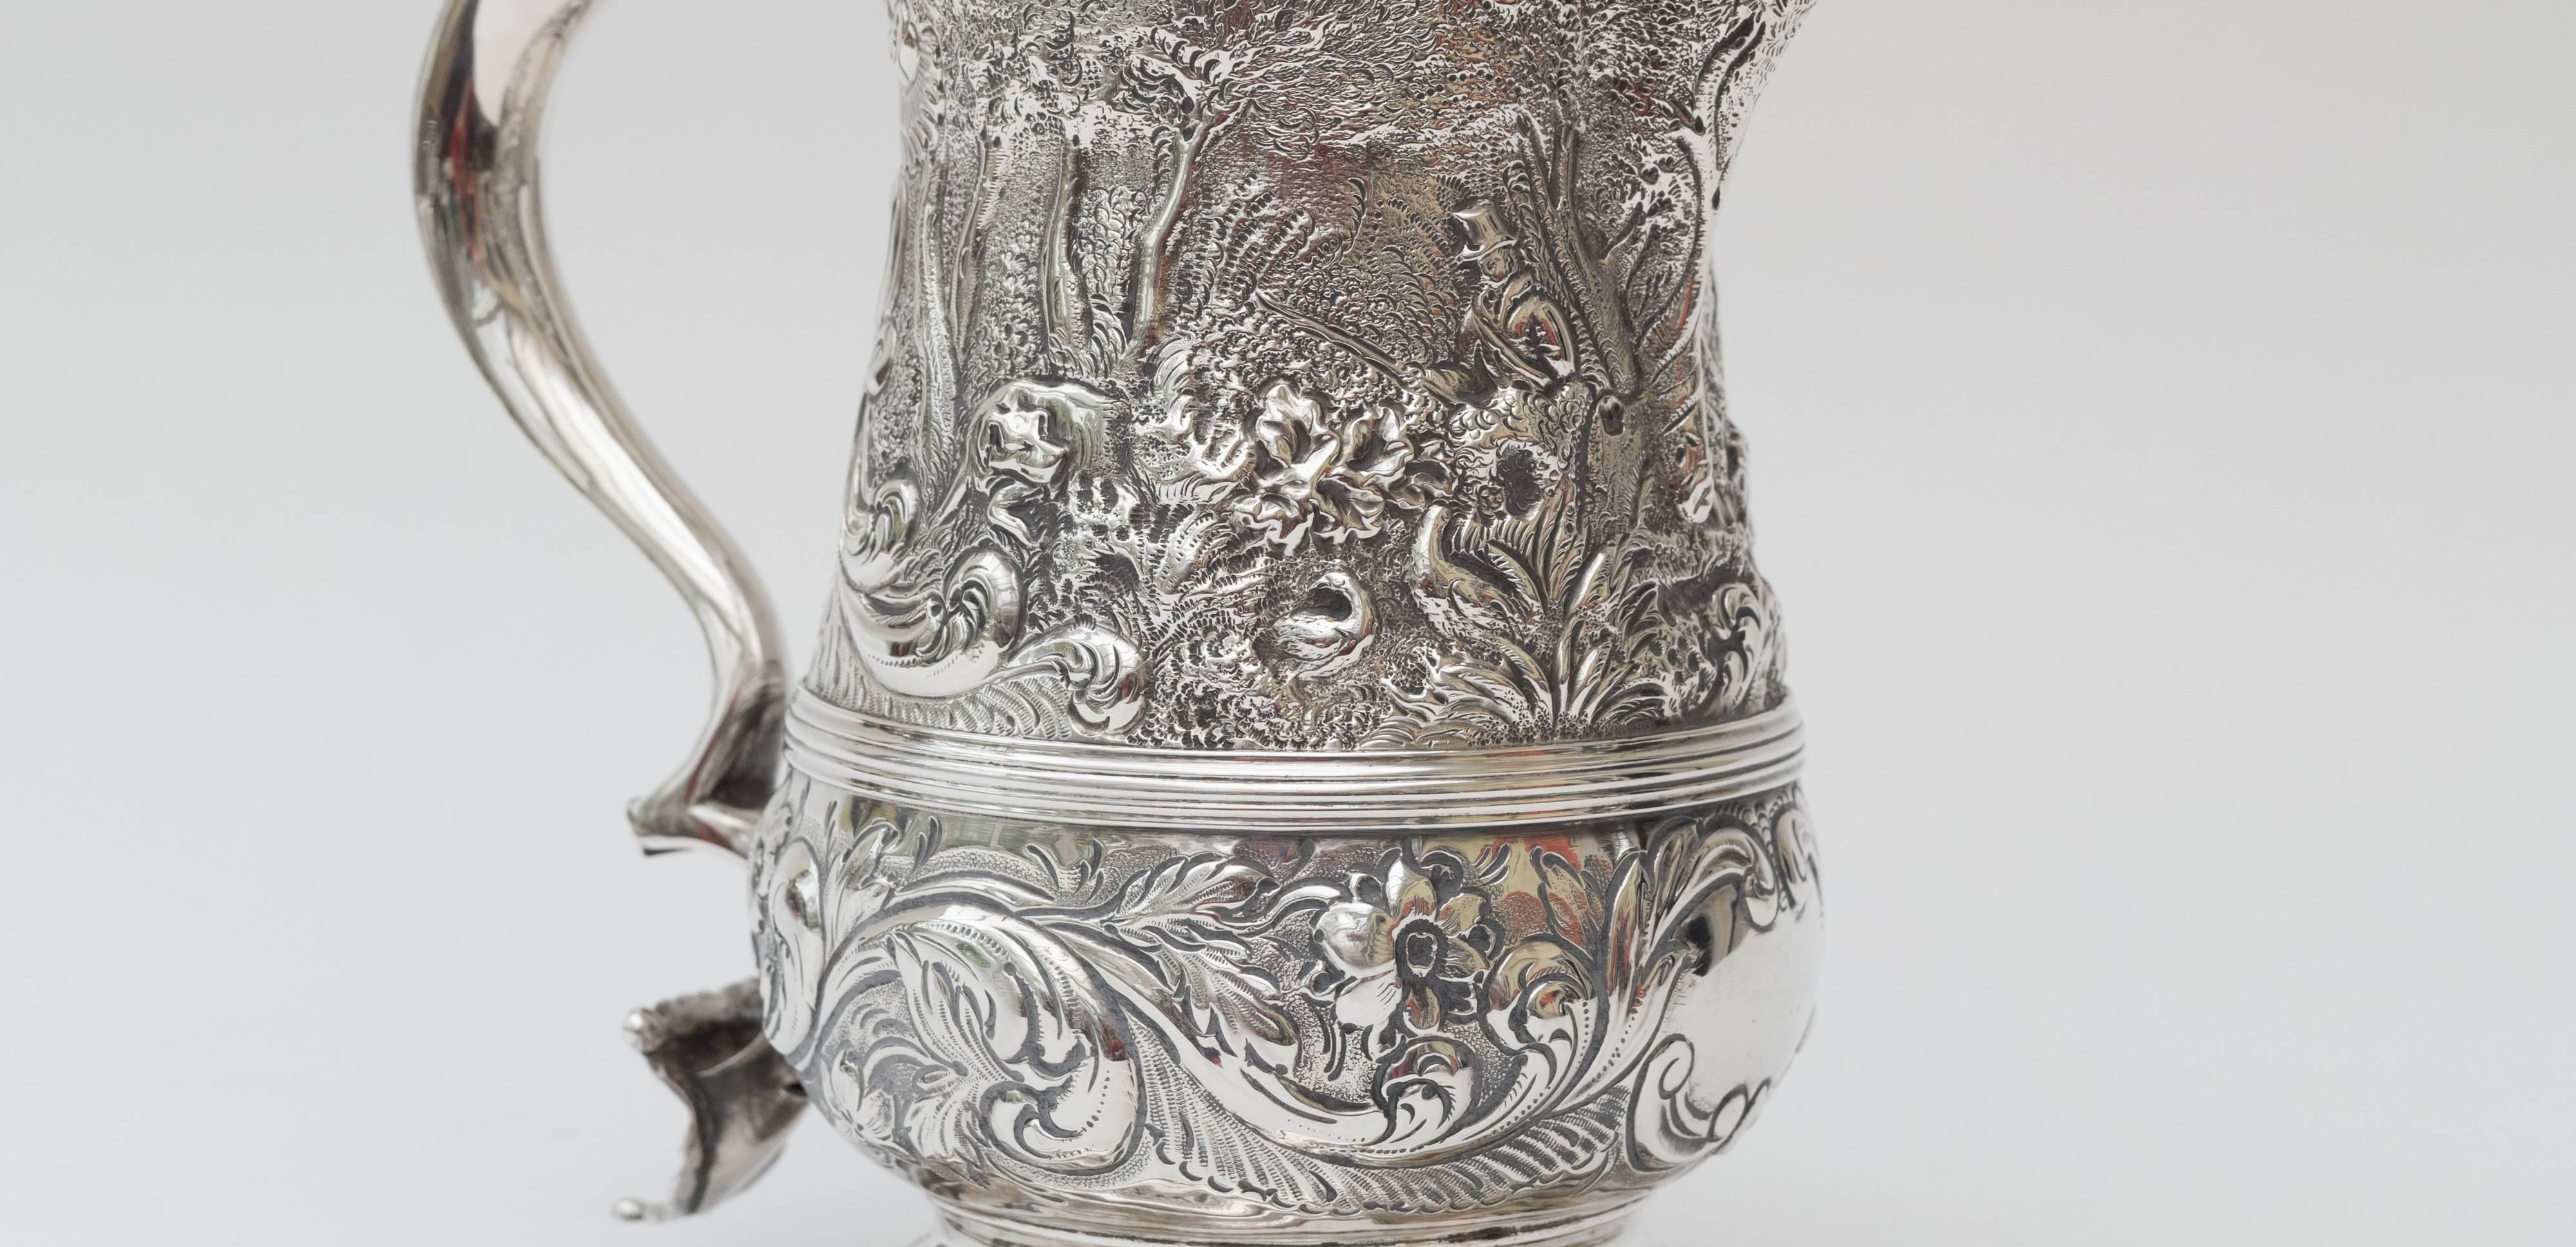 Silver tankard by William Caldecott 
The relief depicts a very detailed hunting scene including pointer dogs and men with guns in woodland.
Caldecott became a London silver smith in 1756
This piece is date marked letter 'K' 1765/6

Measures: